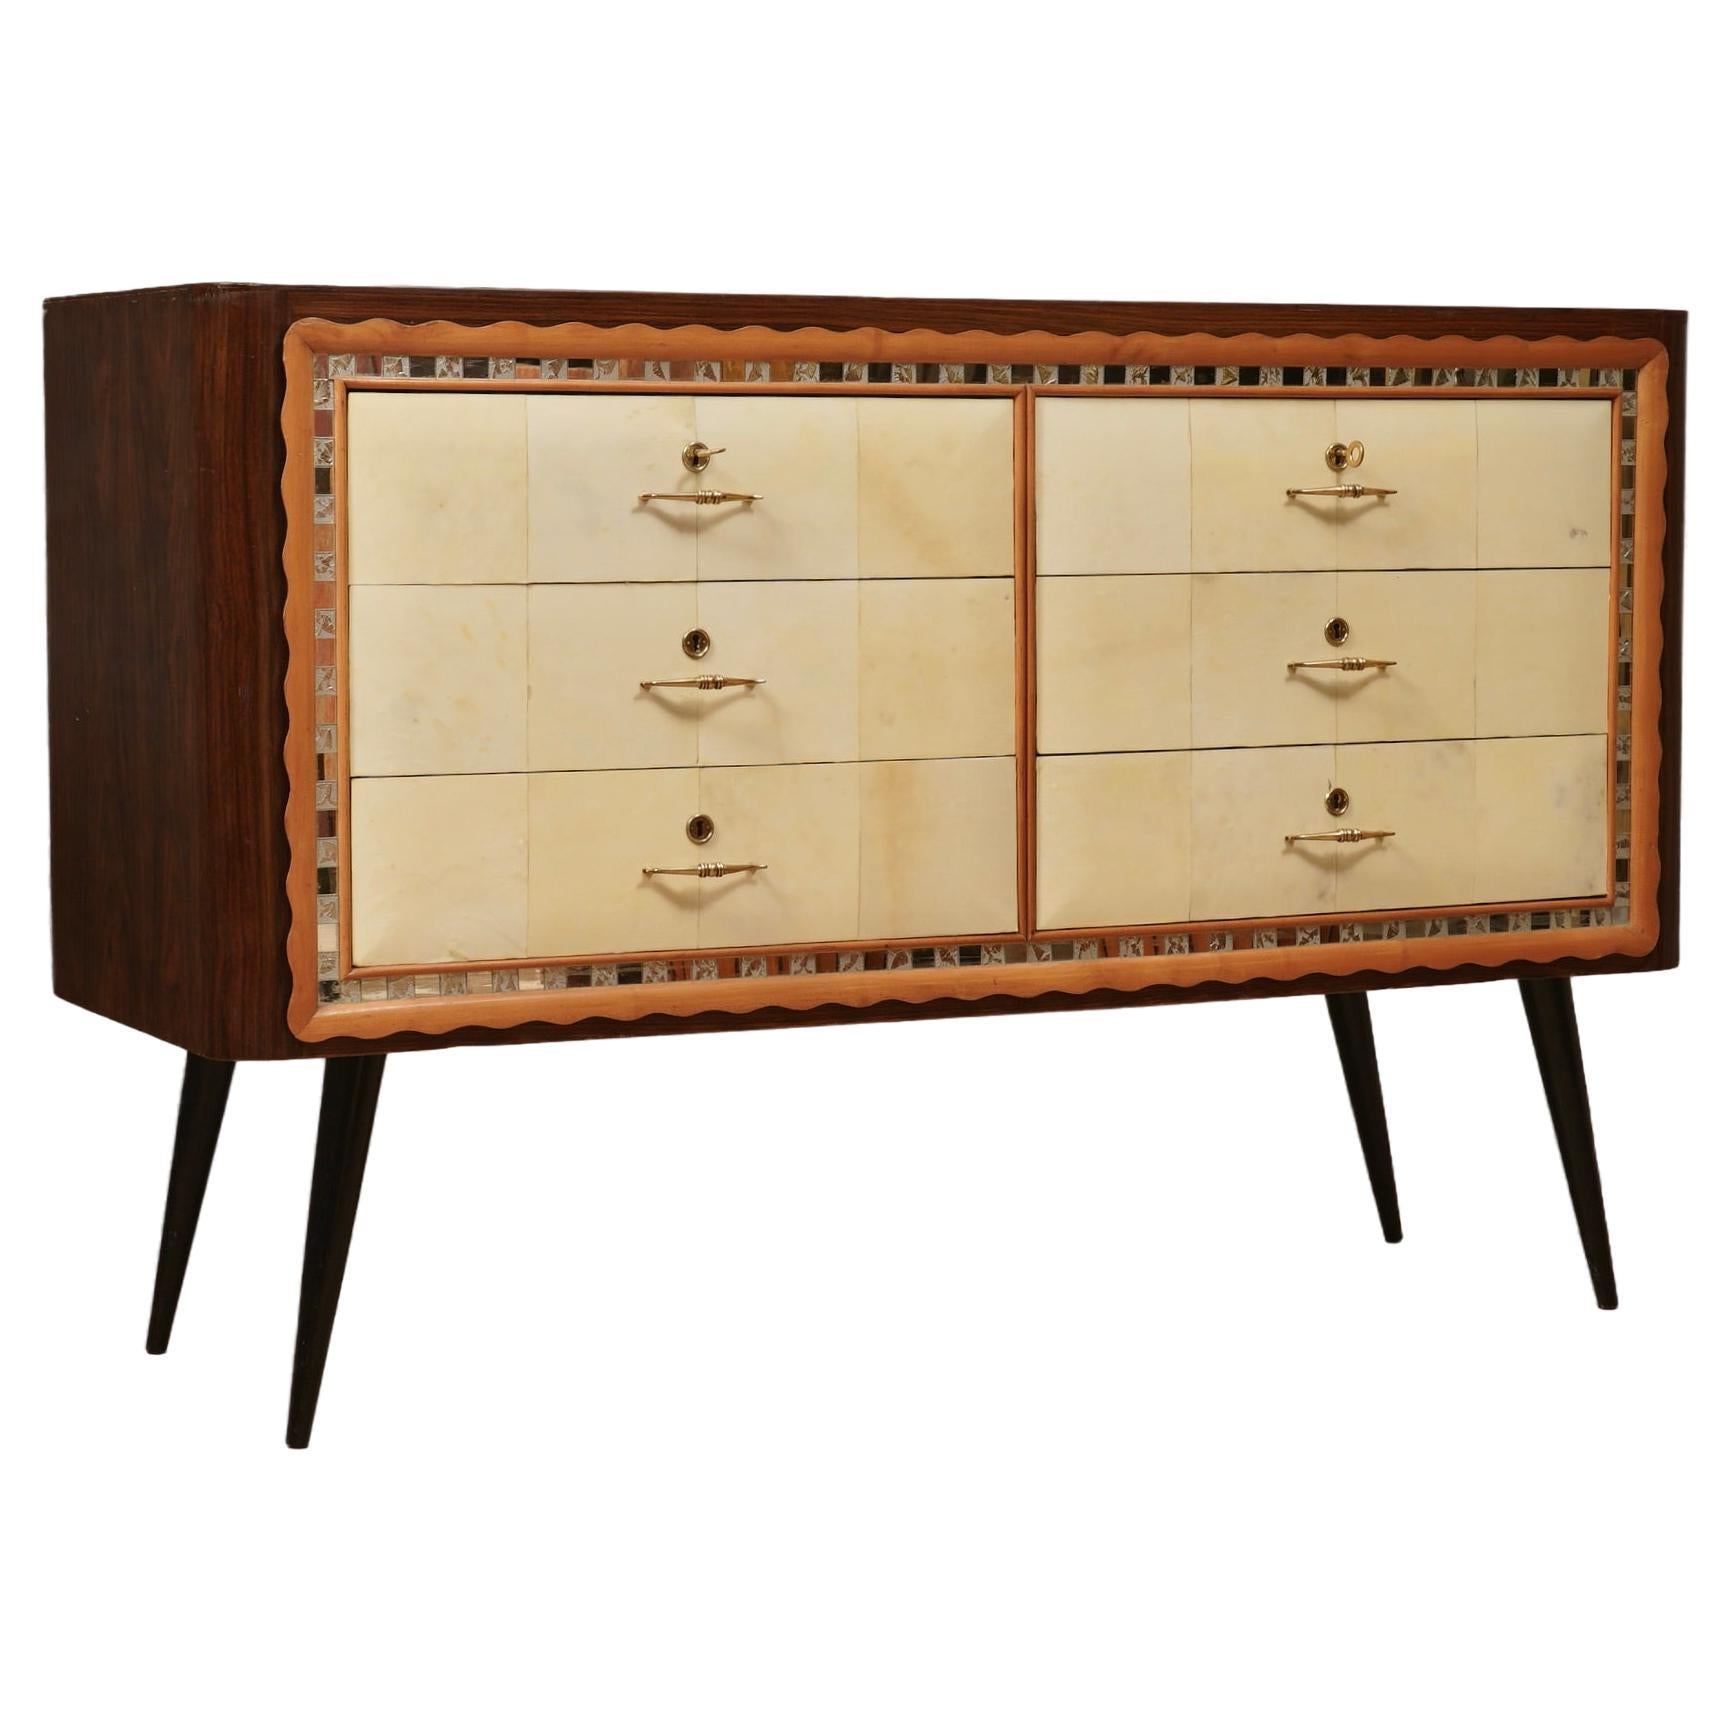 Art Deco Walnut Wood Goat Skin and Brass Italian Commode Chest of Drawers, 1950